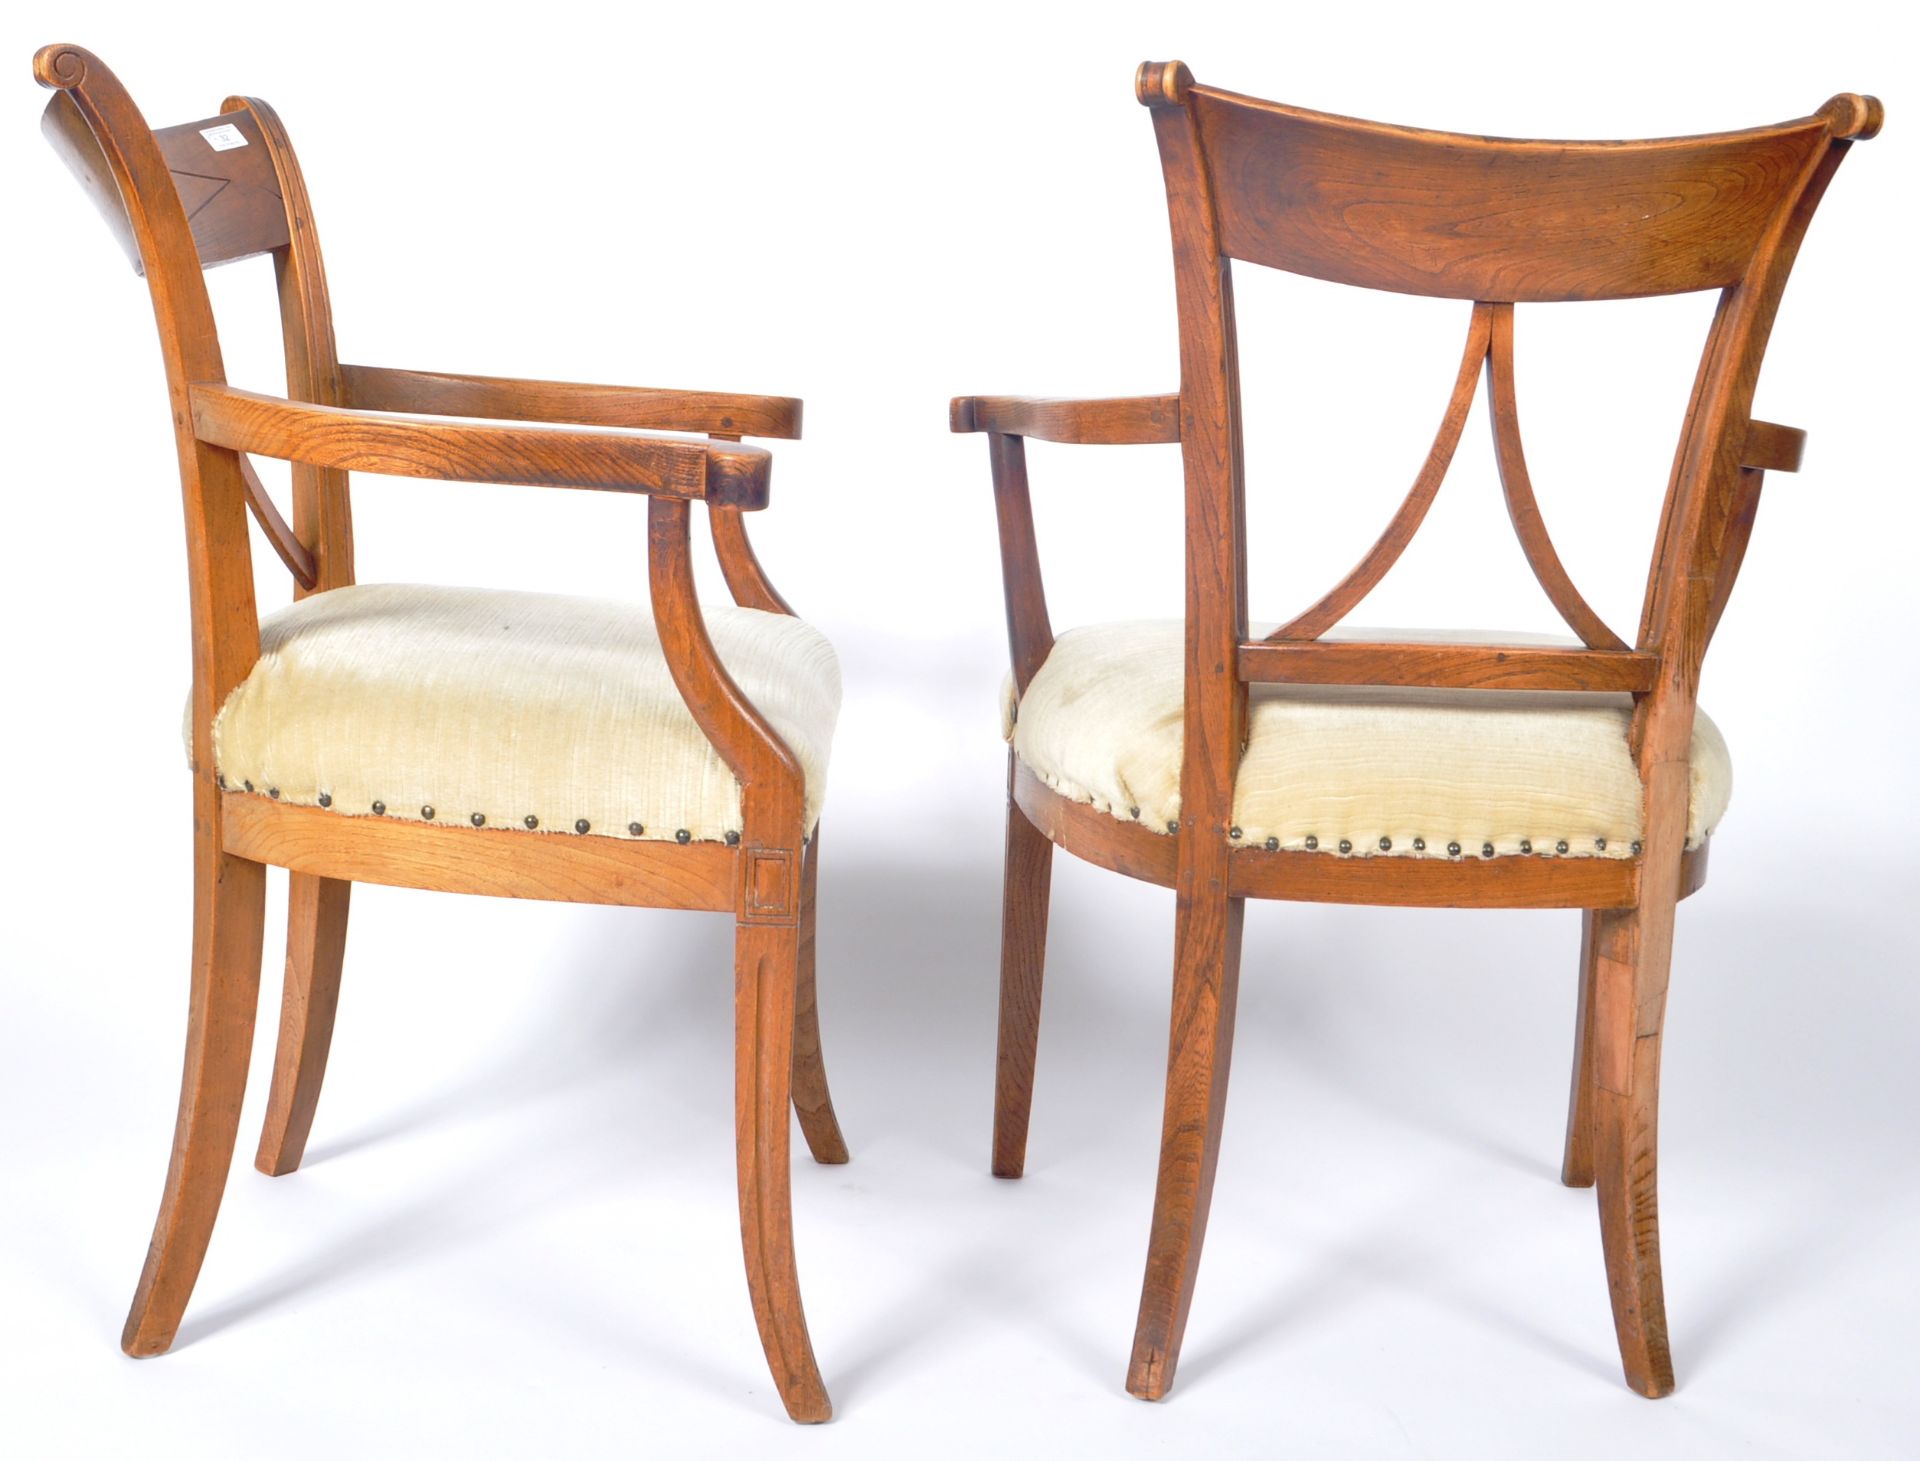 PAIR OF EARLY 19TH CENTURY ASH COUNTRY CHAIRS - Image 6 of 8